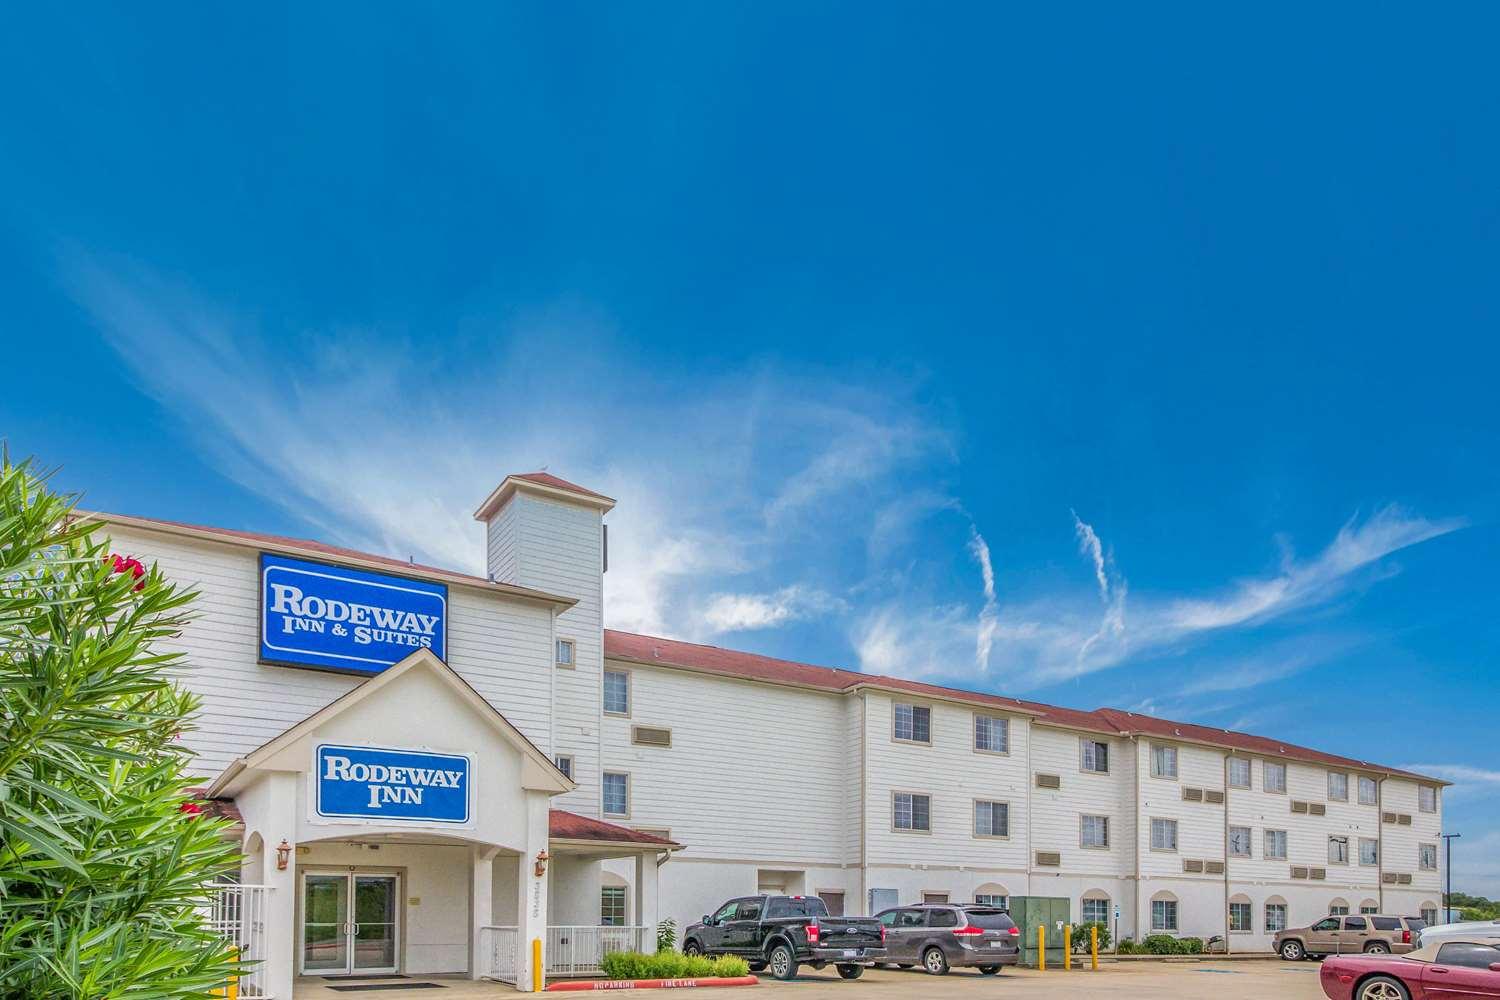 Rodeway Inn and Suites in Port Arthur, TX